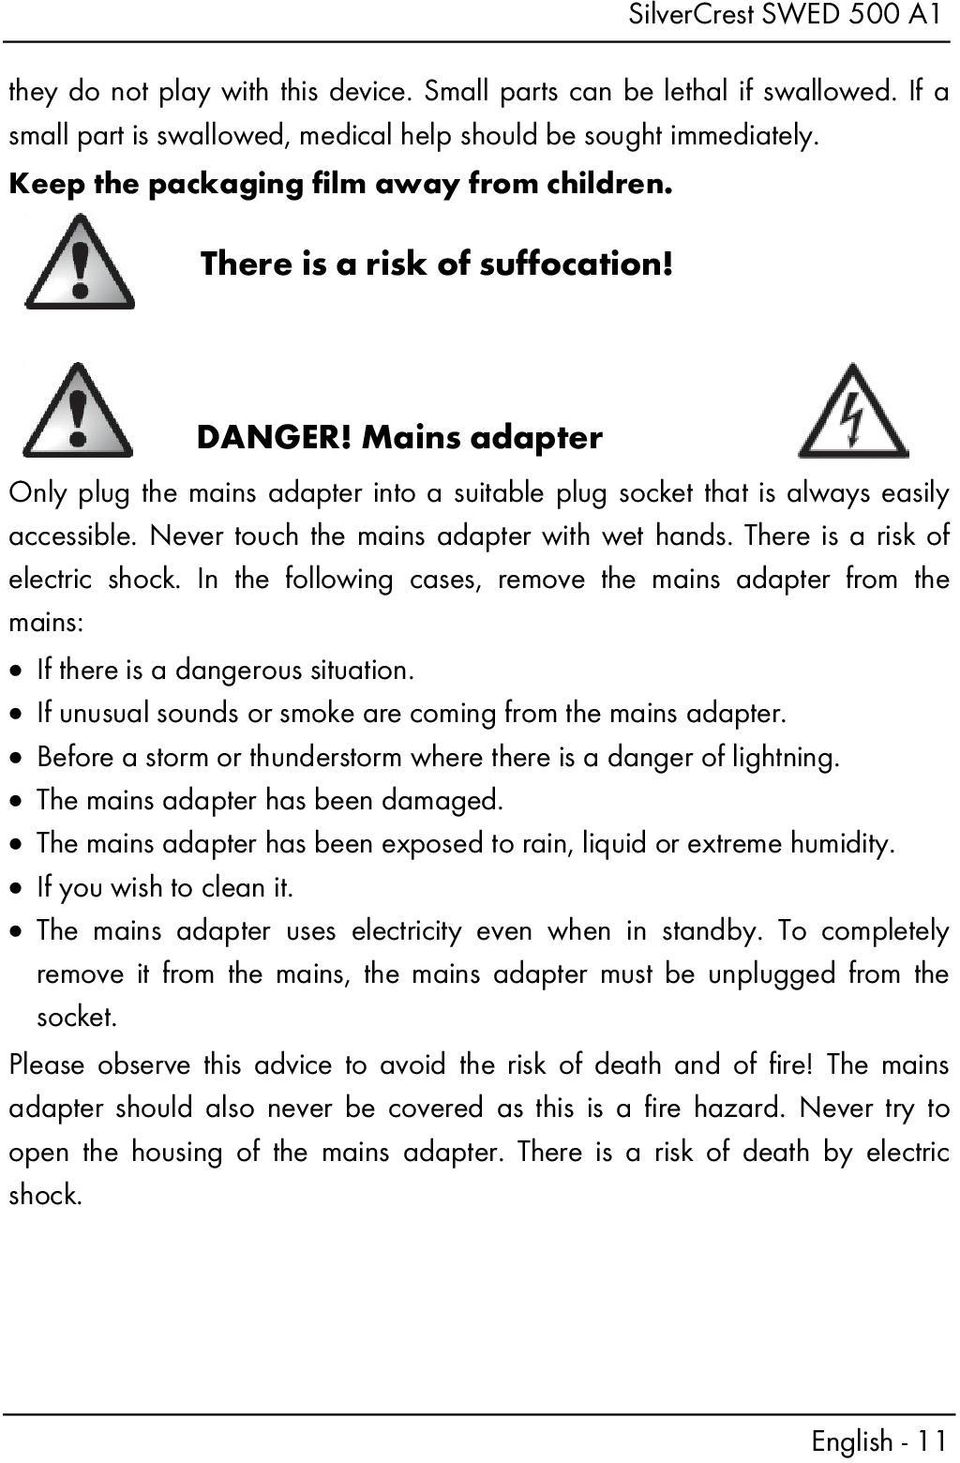 There is a risk of electric shock. In the following cases, remove the mains adapter from the mains: If there is a dangerous situation. If unusual sounds or smoke are coming from the mains adapter.